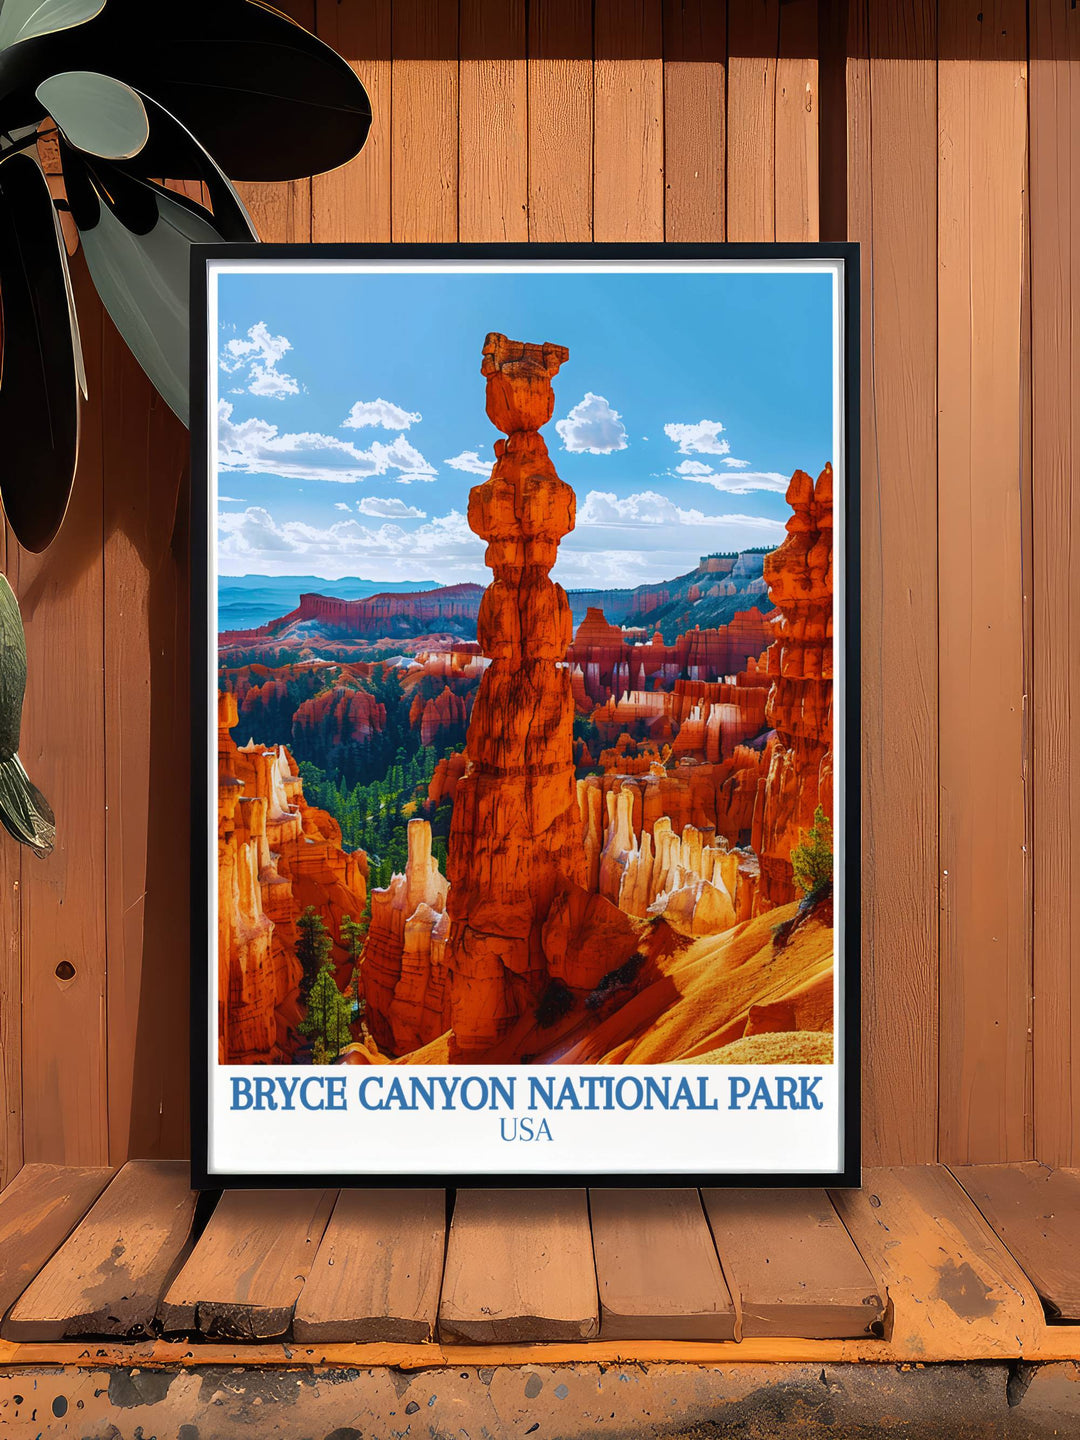 Captivating Bryce Canyon artwork highlighting the unique rock formations of Thors Hammer. Perfect addition to any room in your home. This high quality print is available as a digital download for convenient at home printing